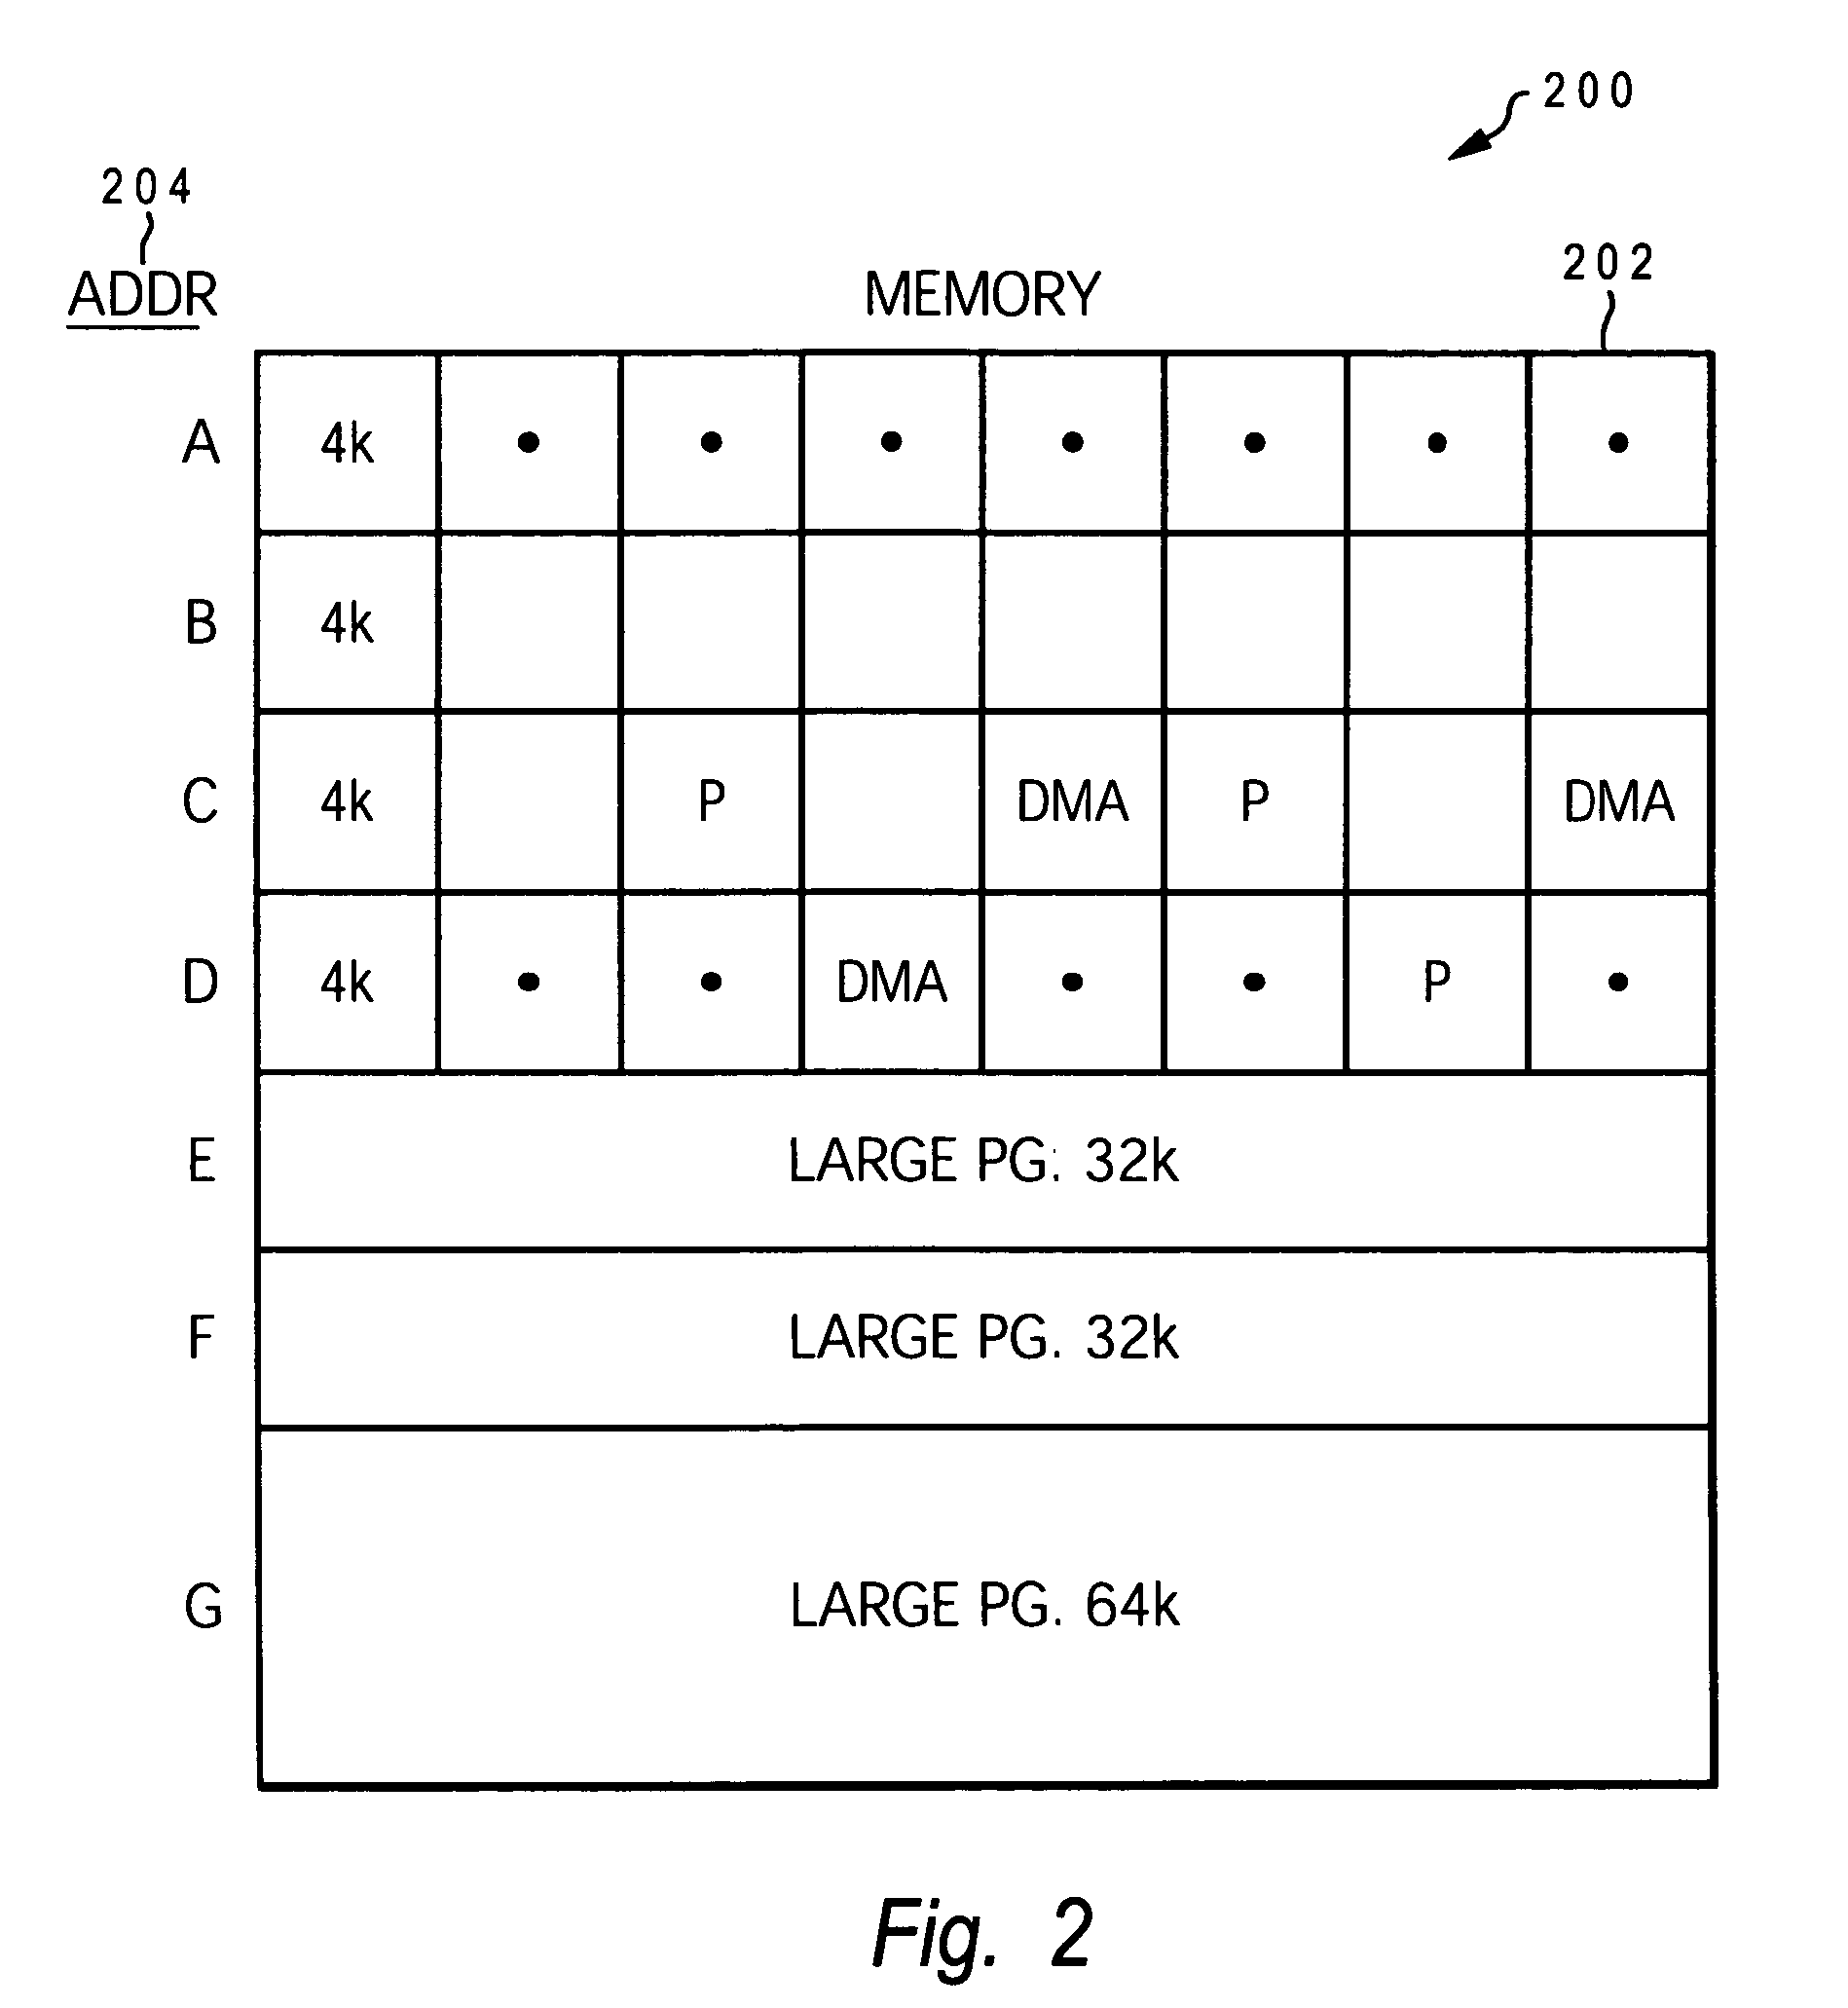 Method and mechanism for efficiently creating large virtual memory pages in a multiple page size environment